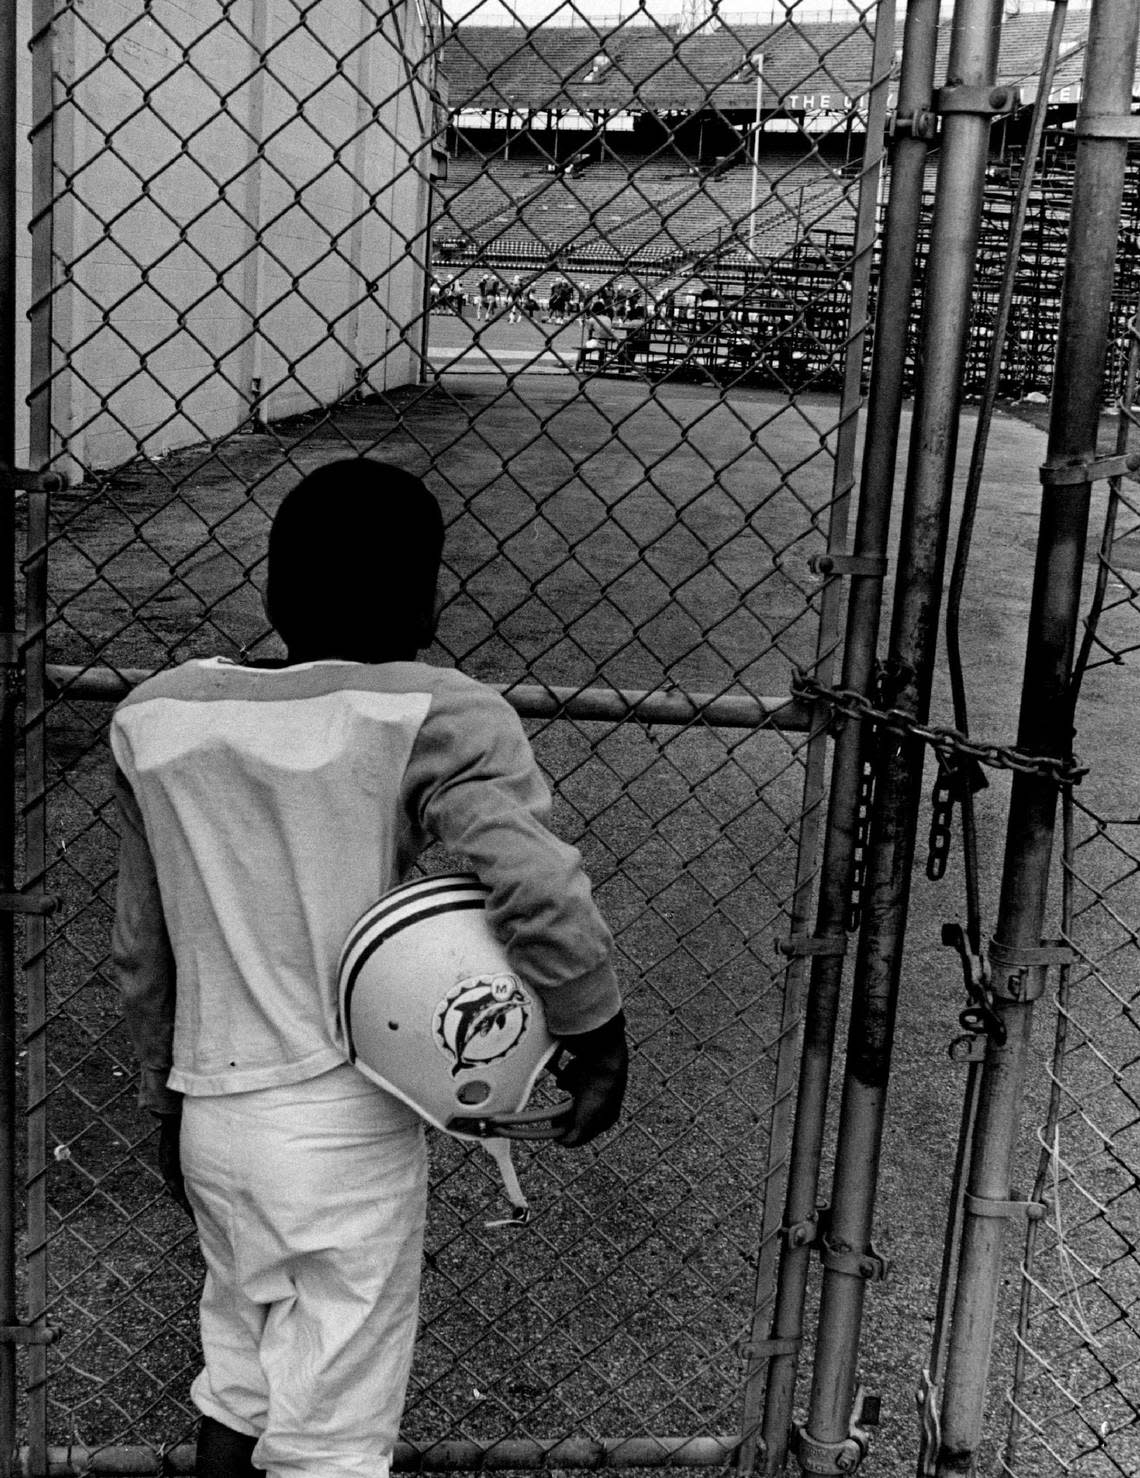 Miami Dolphin had a final fling at the orange bowl, but all gates were kept securely locked and Bernardo Suarez, age 9 had to watch from after thru the east end zone